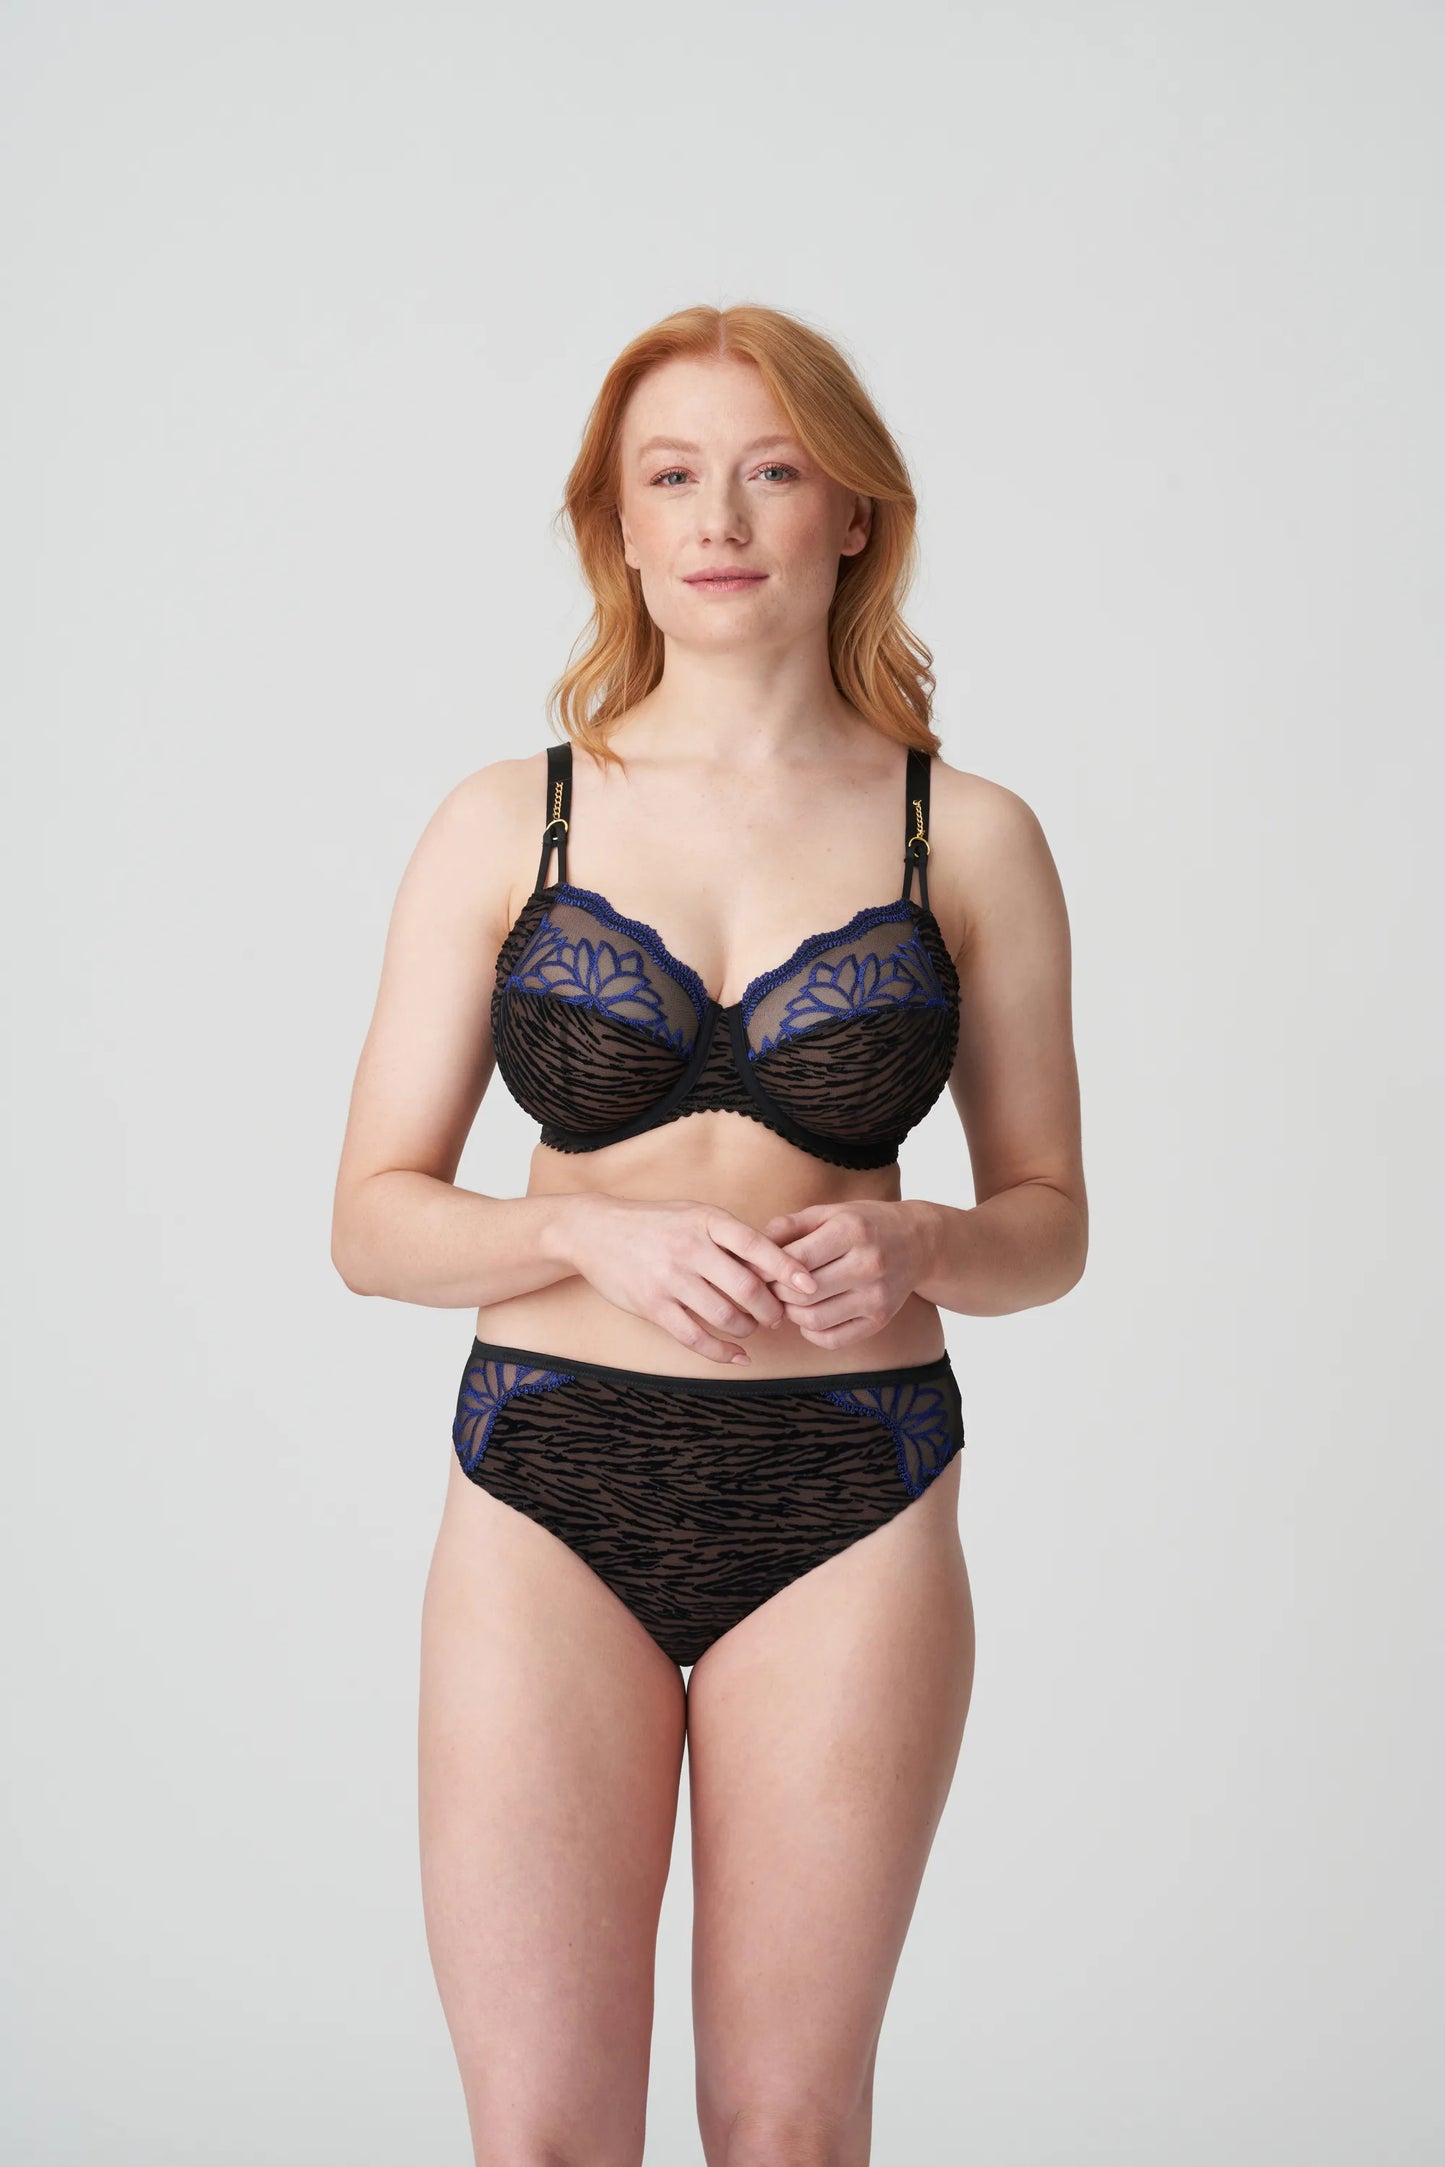 Prima Donna Beugel BH - Cheyney 0163450 - Sultry black